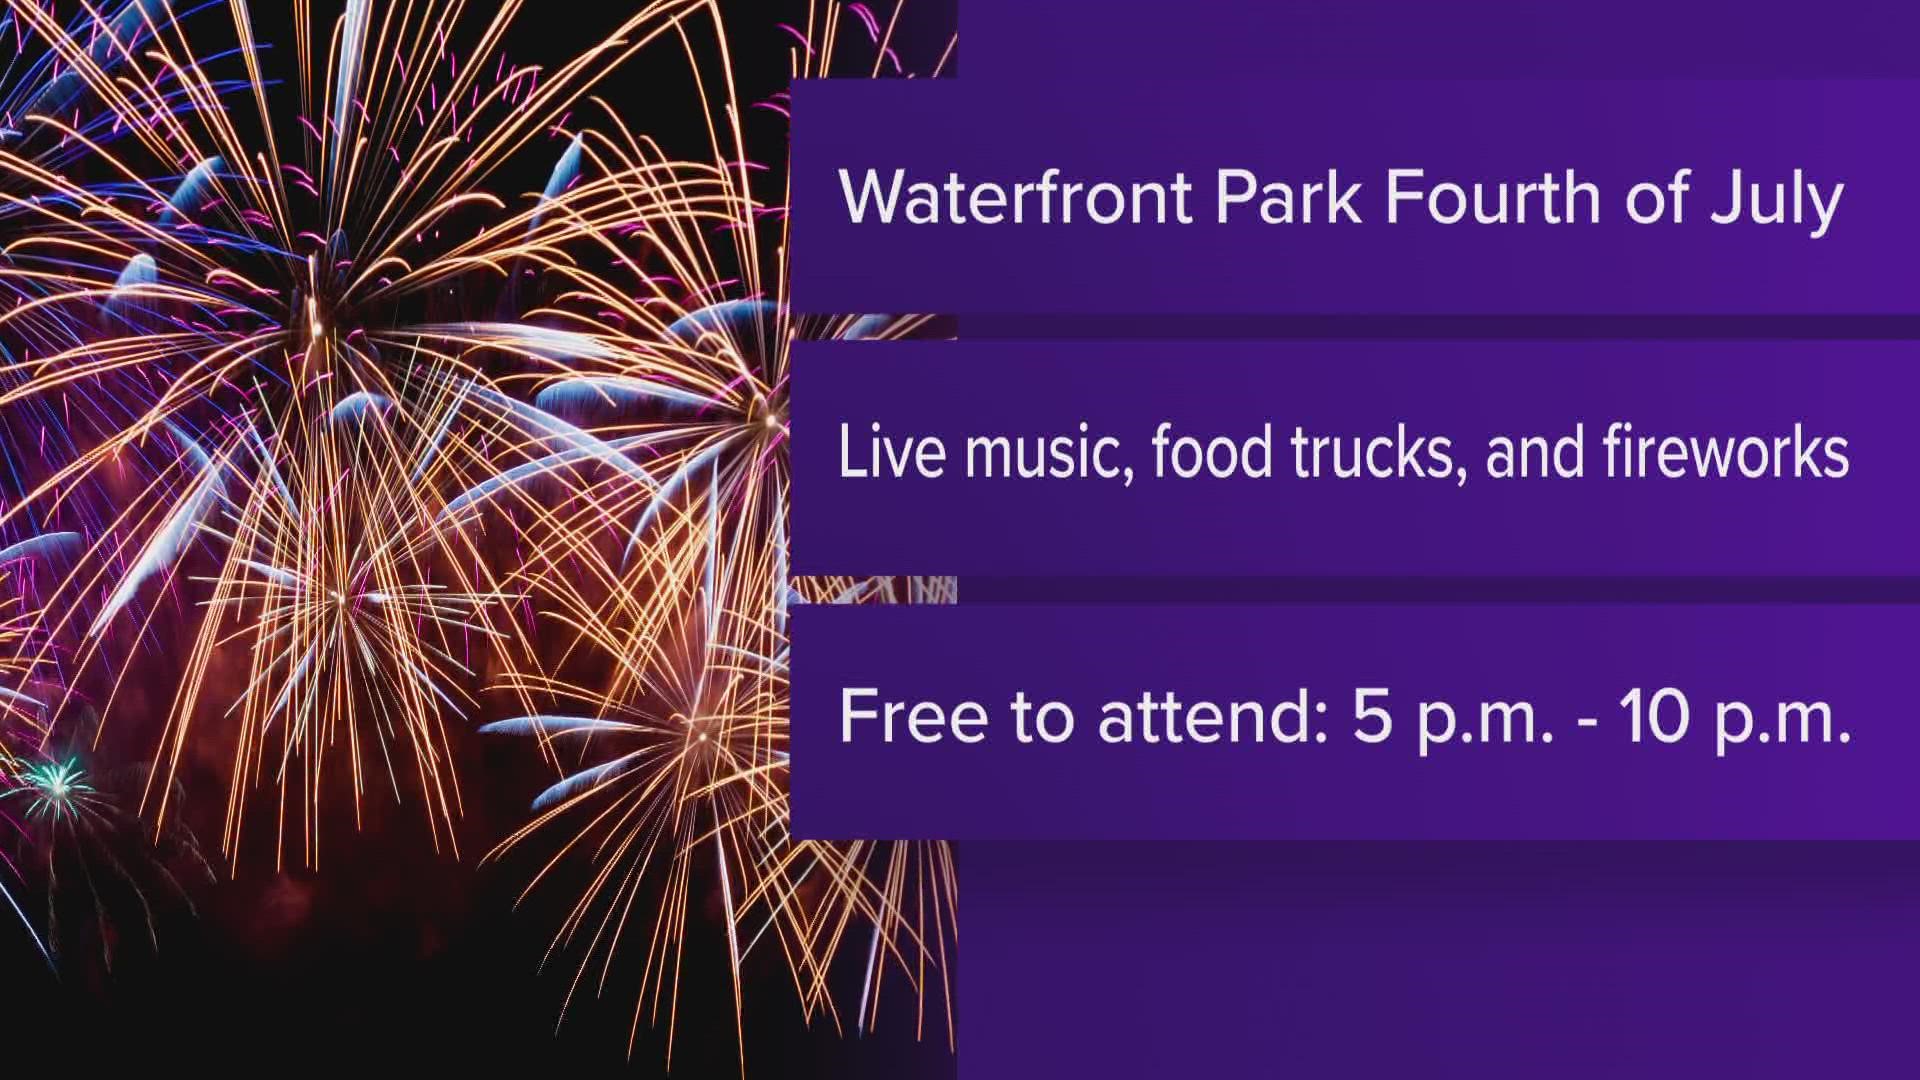 Waterfront Park will have live music, food trucks and the night will end with a fireworks display over the Ohio River.